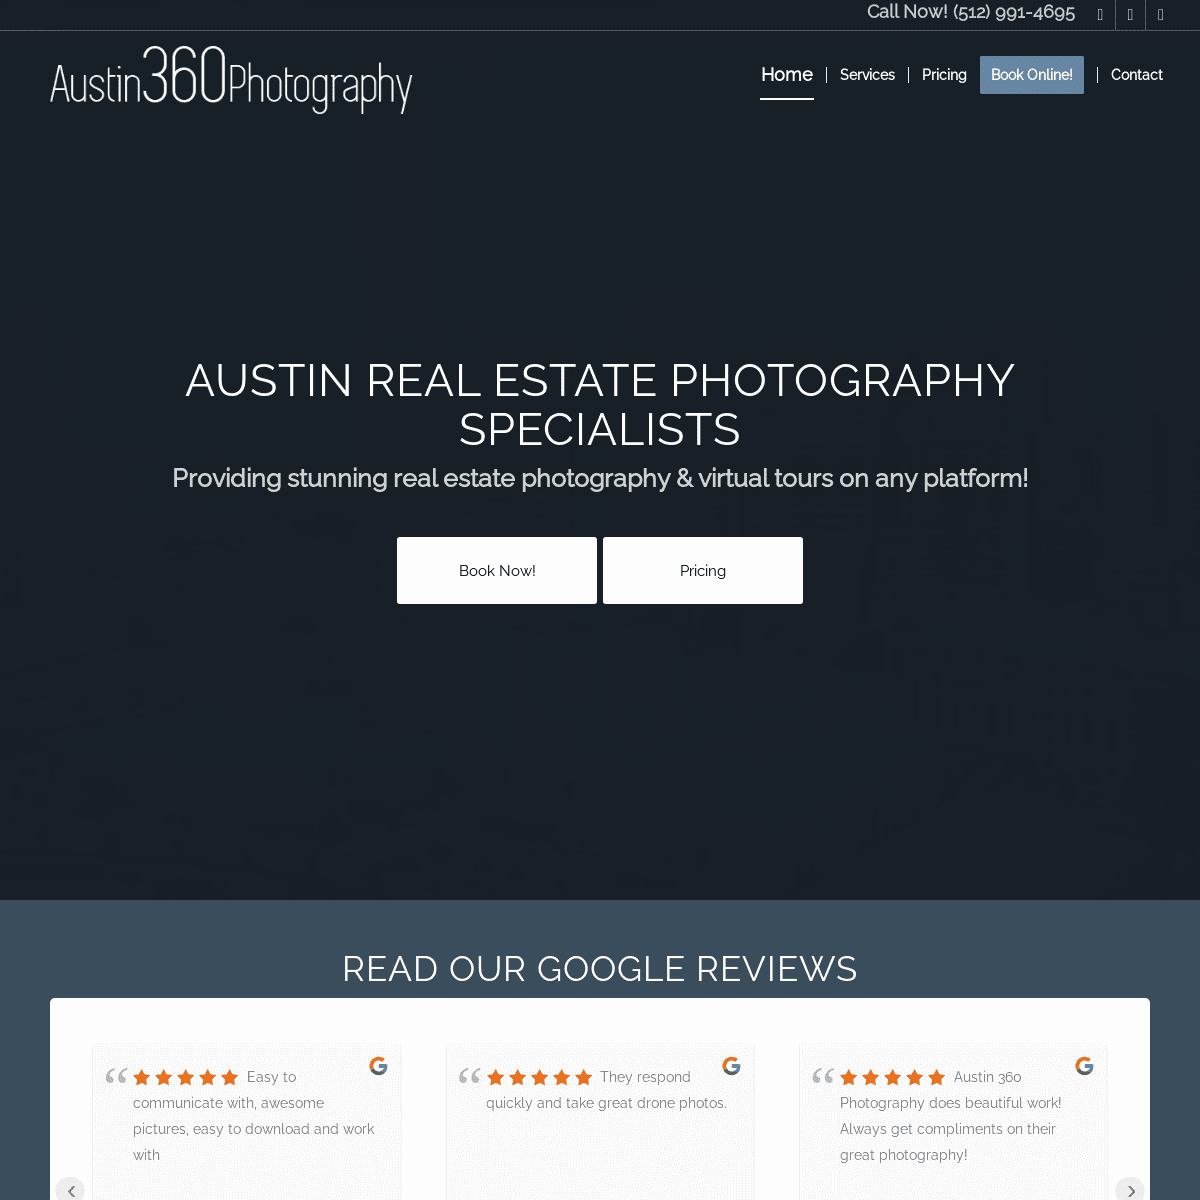 A complete backup of https://austin360photography.com